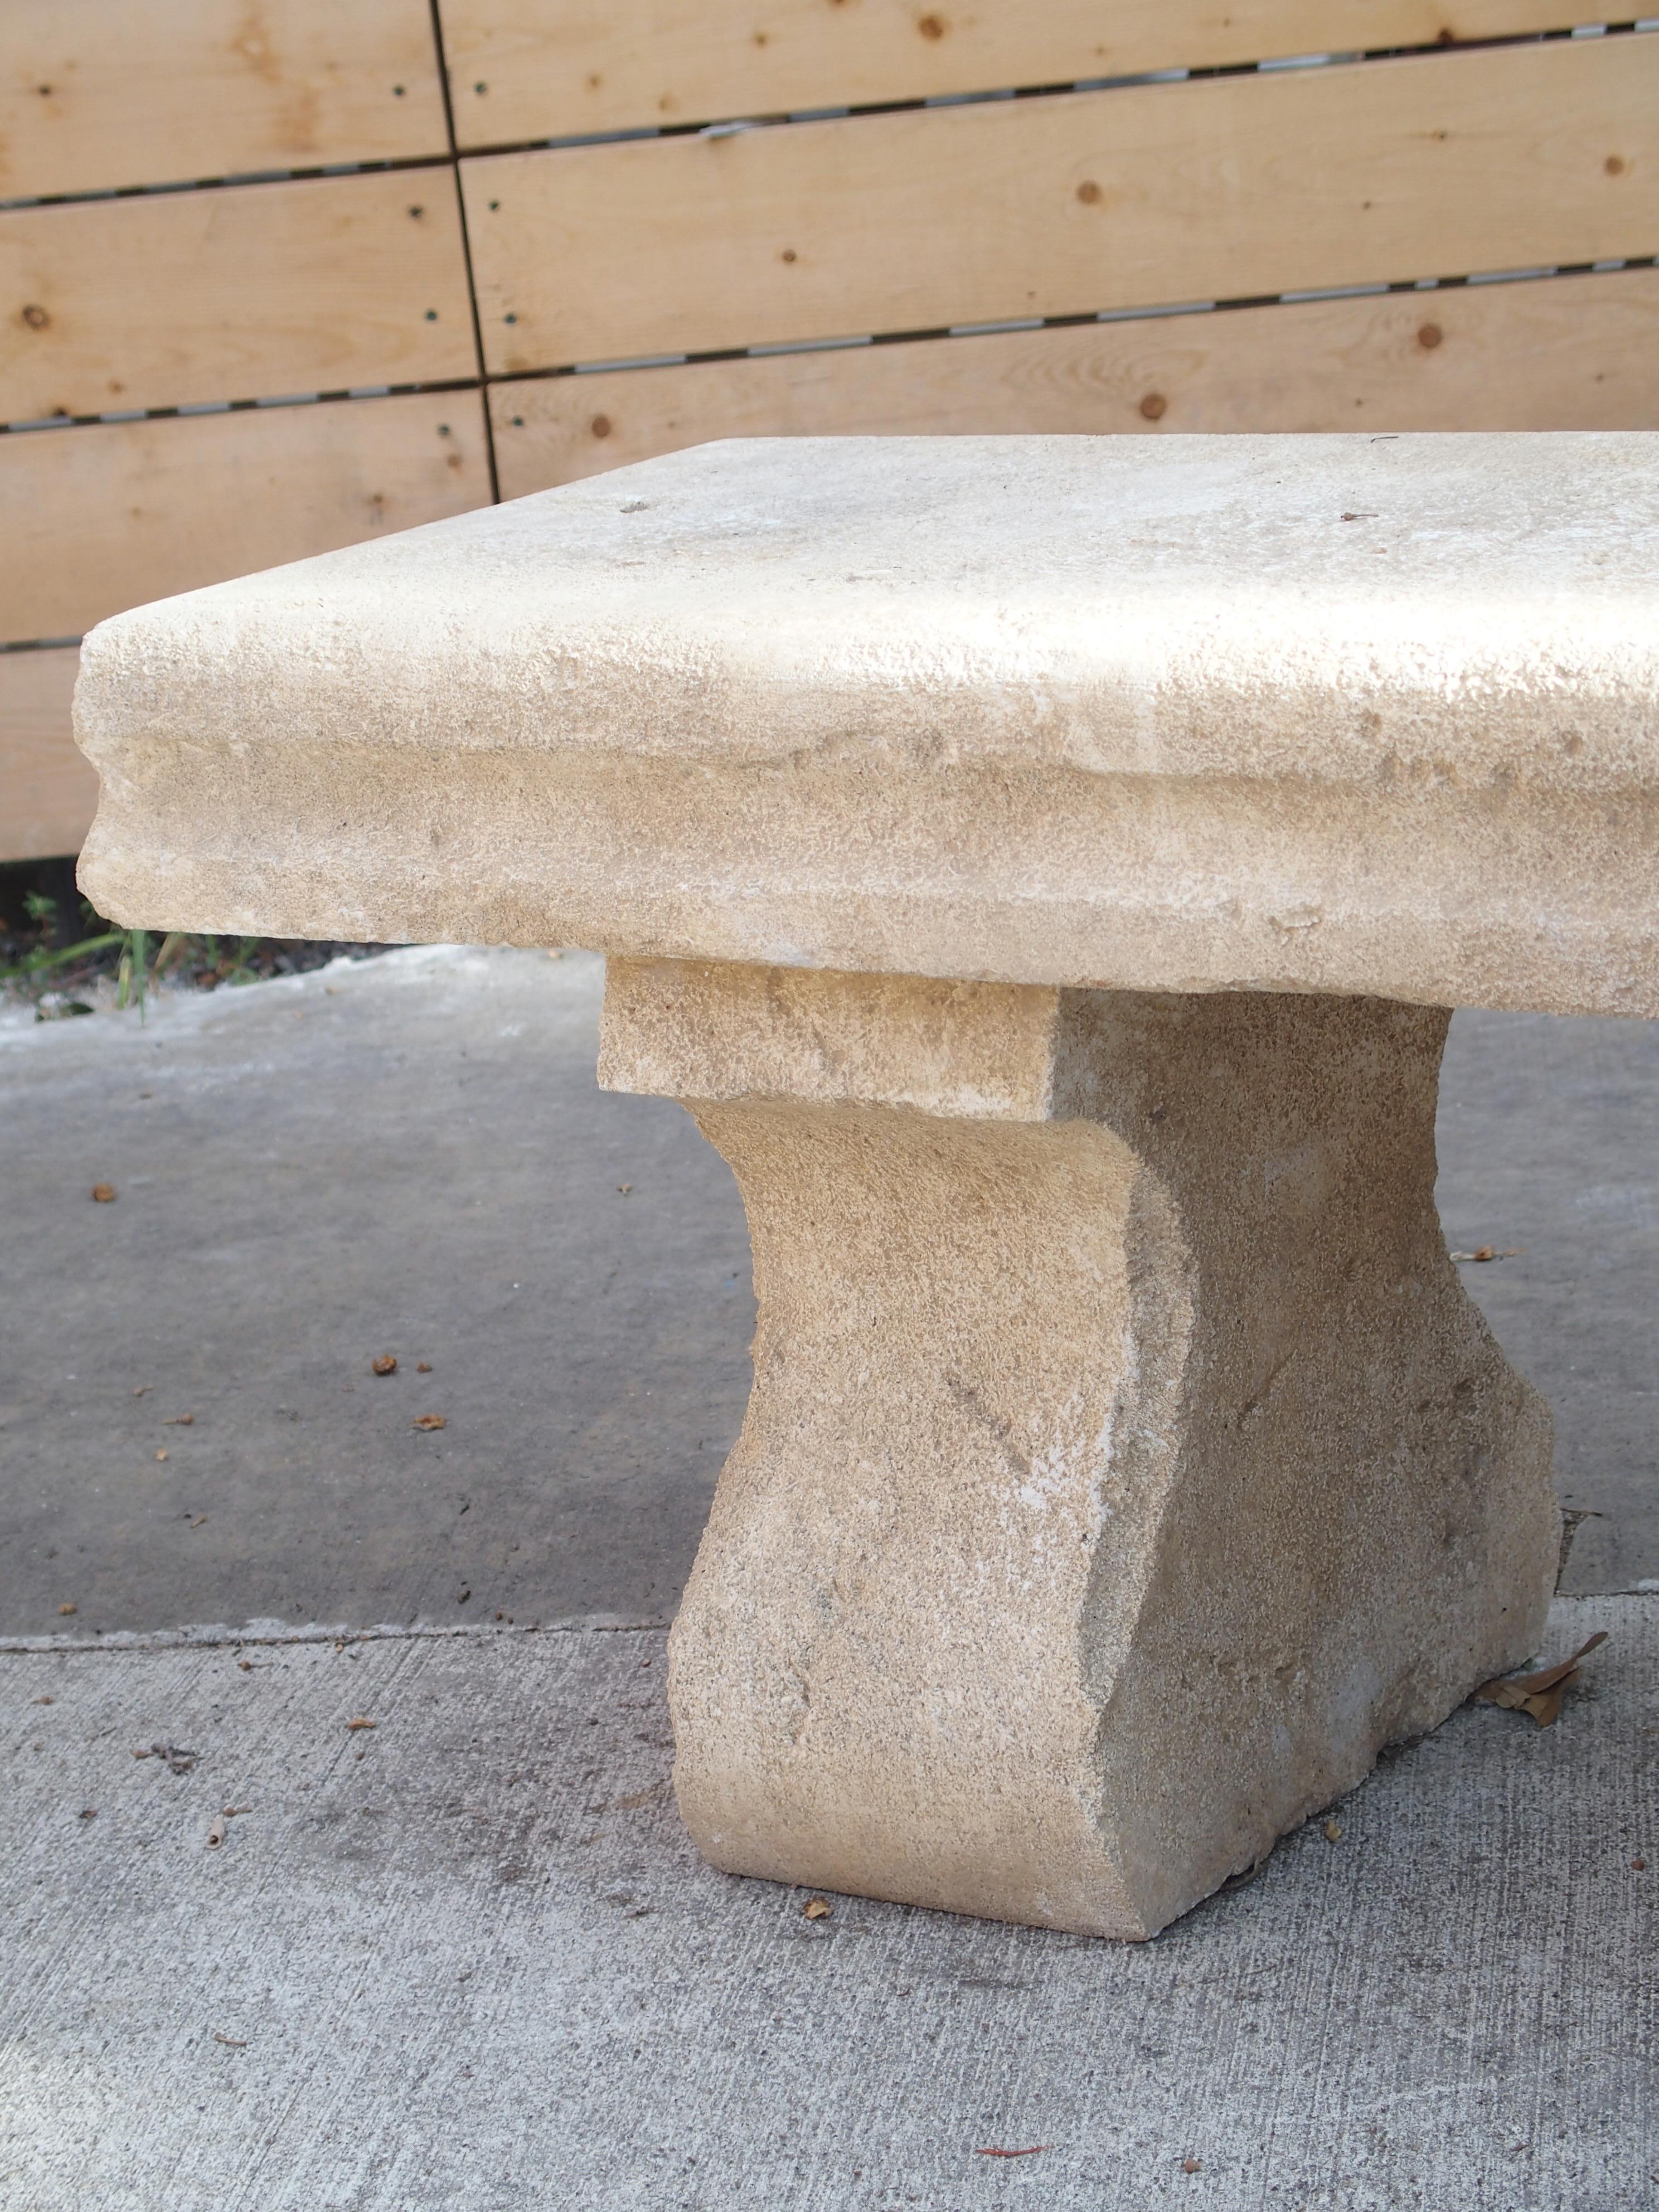 Hand-carved in the South of France, this limestone villa bench rests upon two shaped legs. The lovely cream color stone measures 4 ¾ inches thick and has white accents. A recessed cavetto edge embellishes the rectangular seat on all four sides.